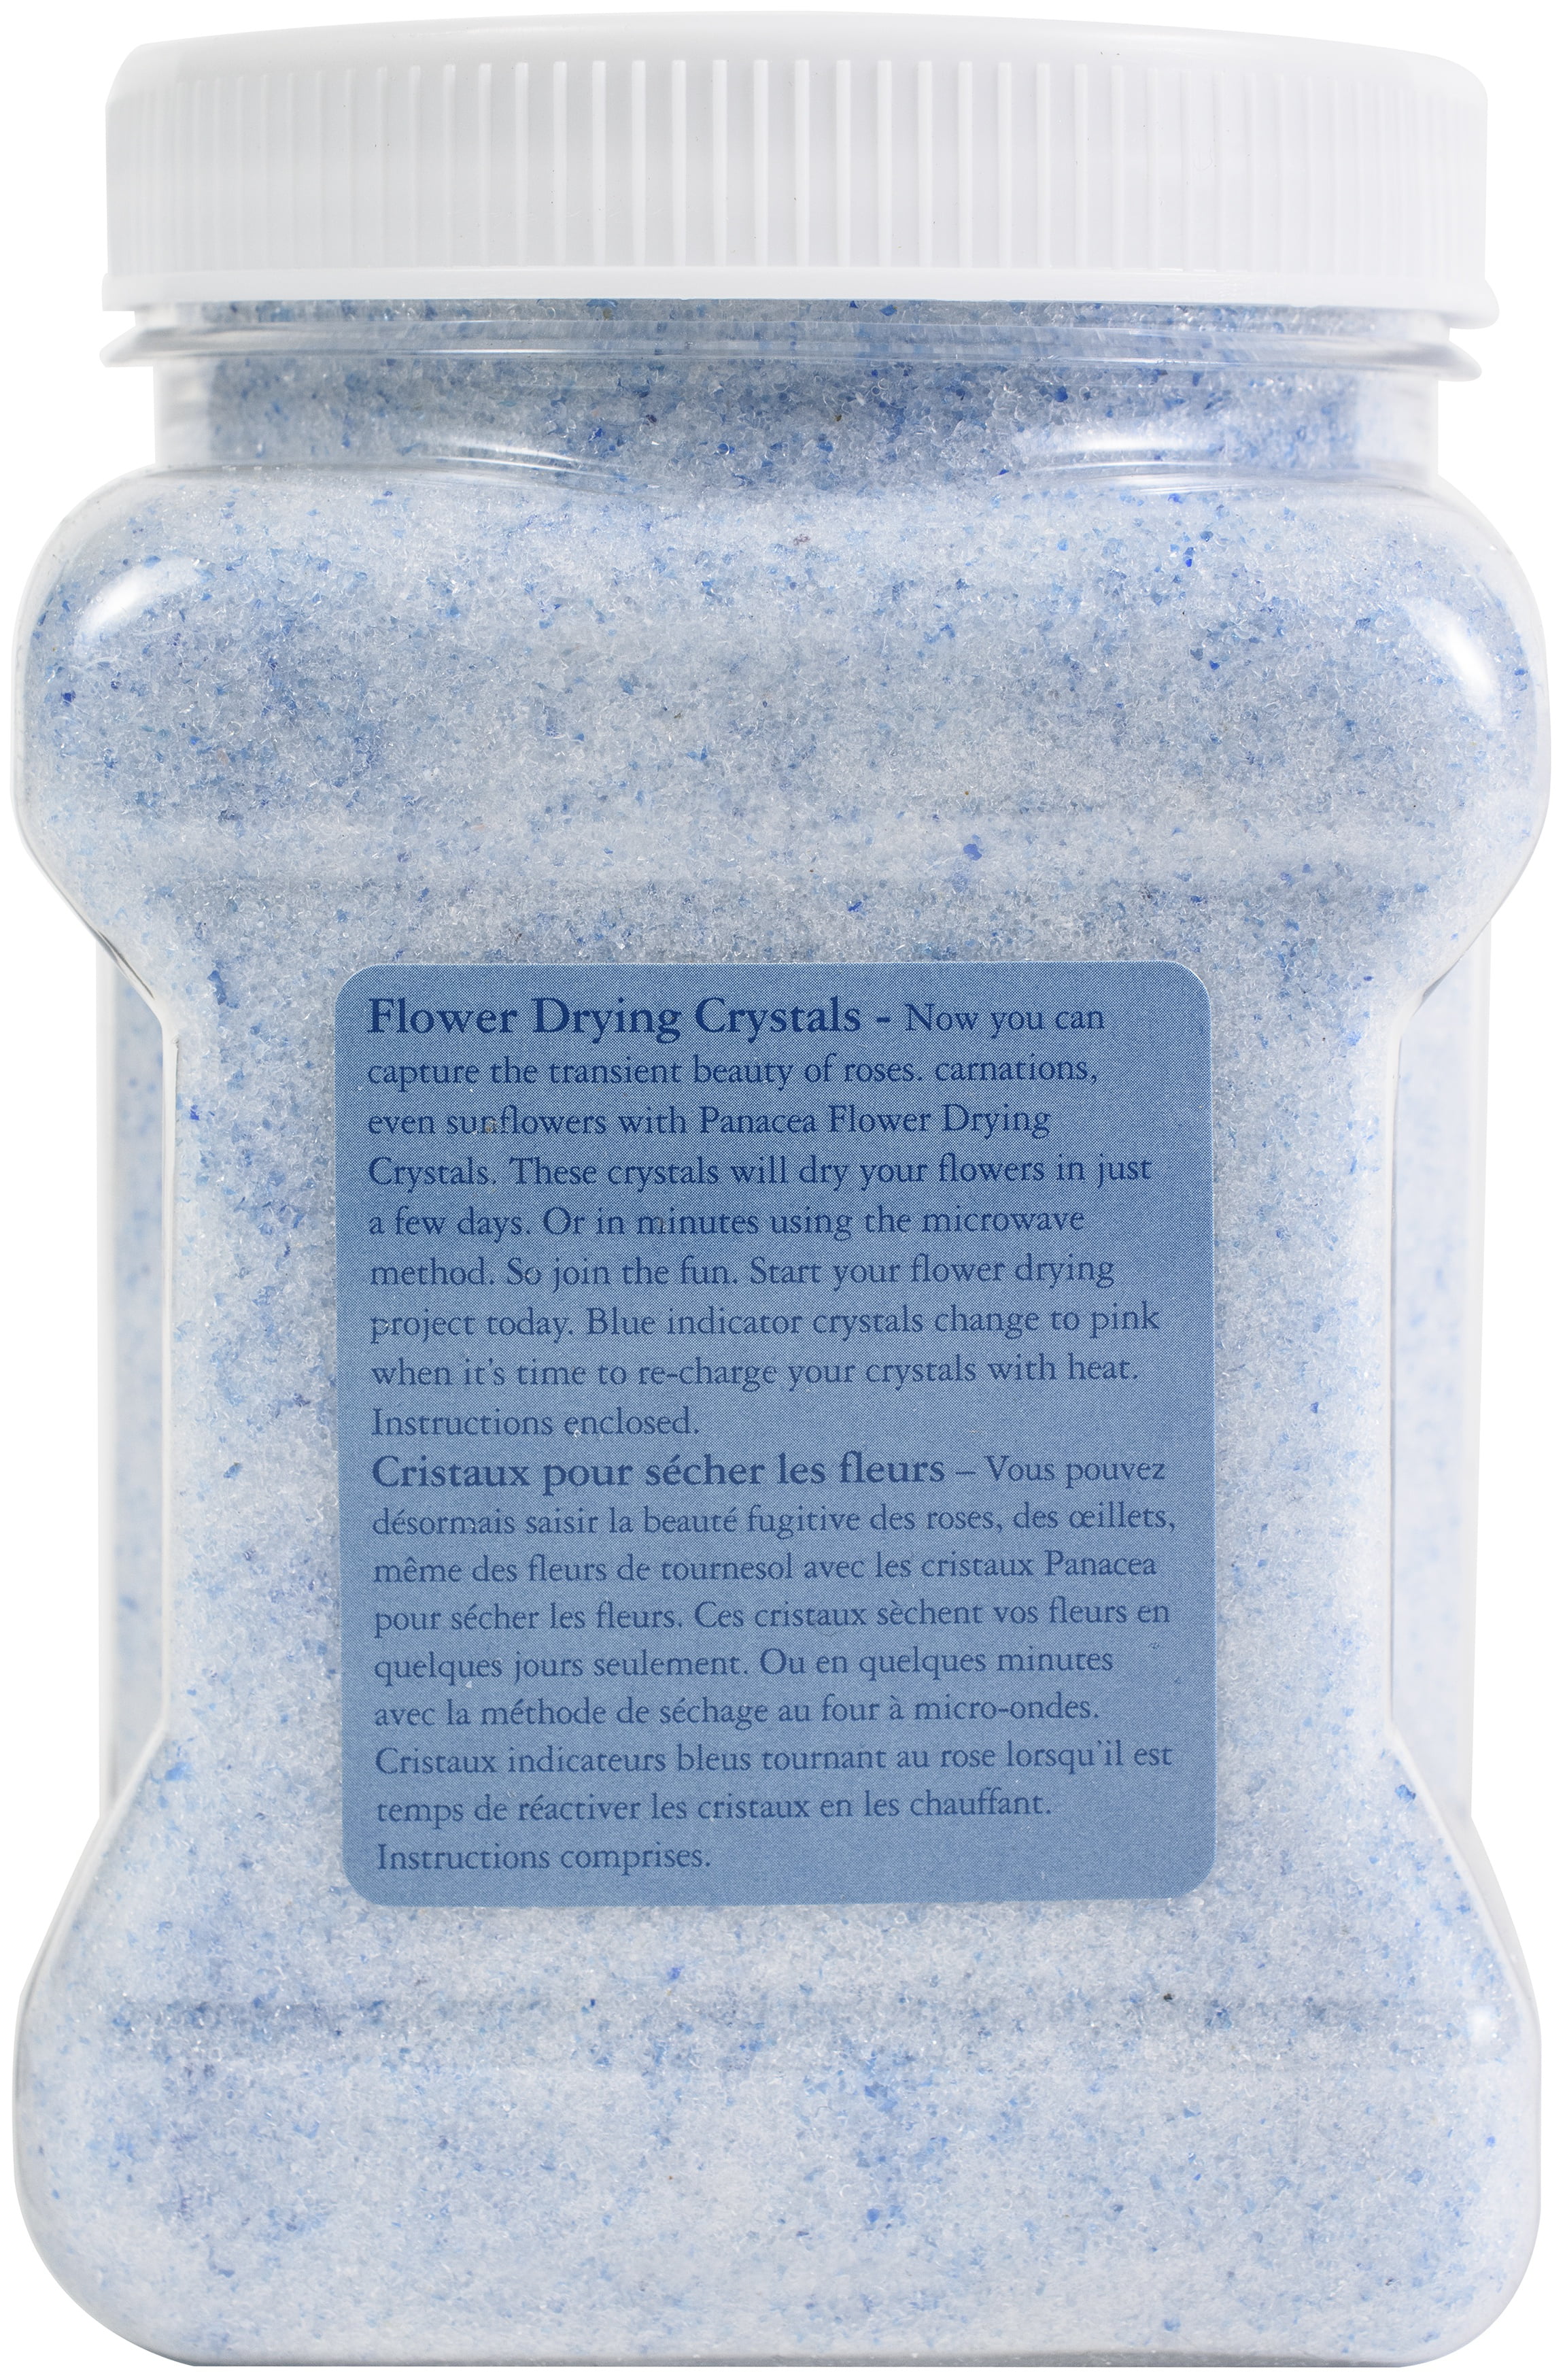 wisedry Silica Gel Flower Drying Crystals - 8 LBS, Color Indicating,  Reusable